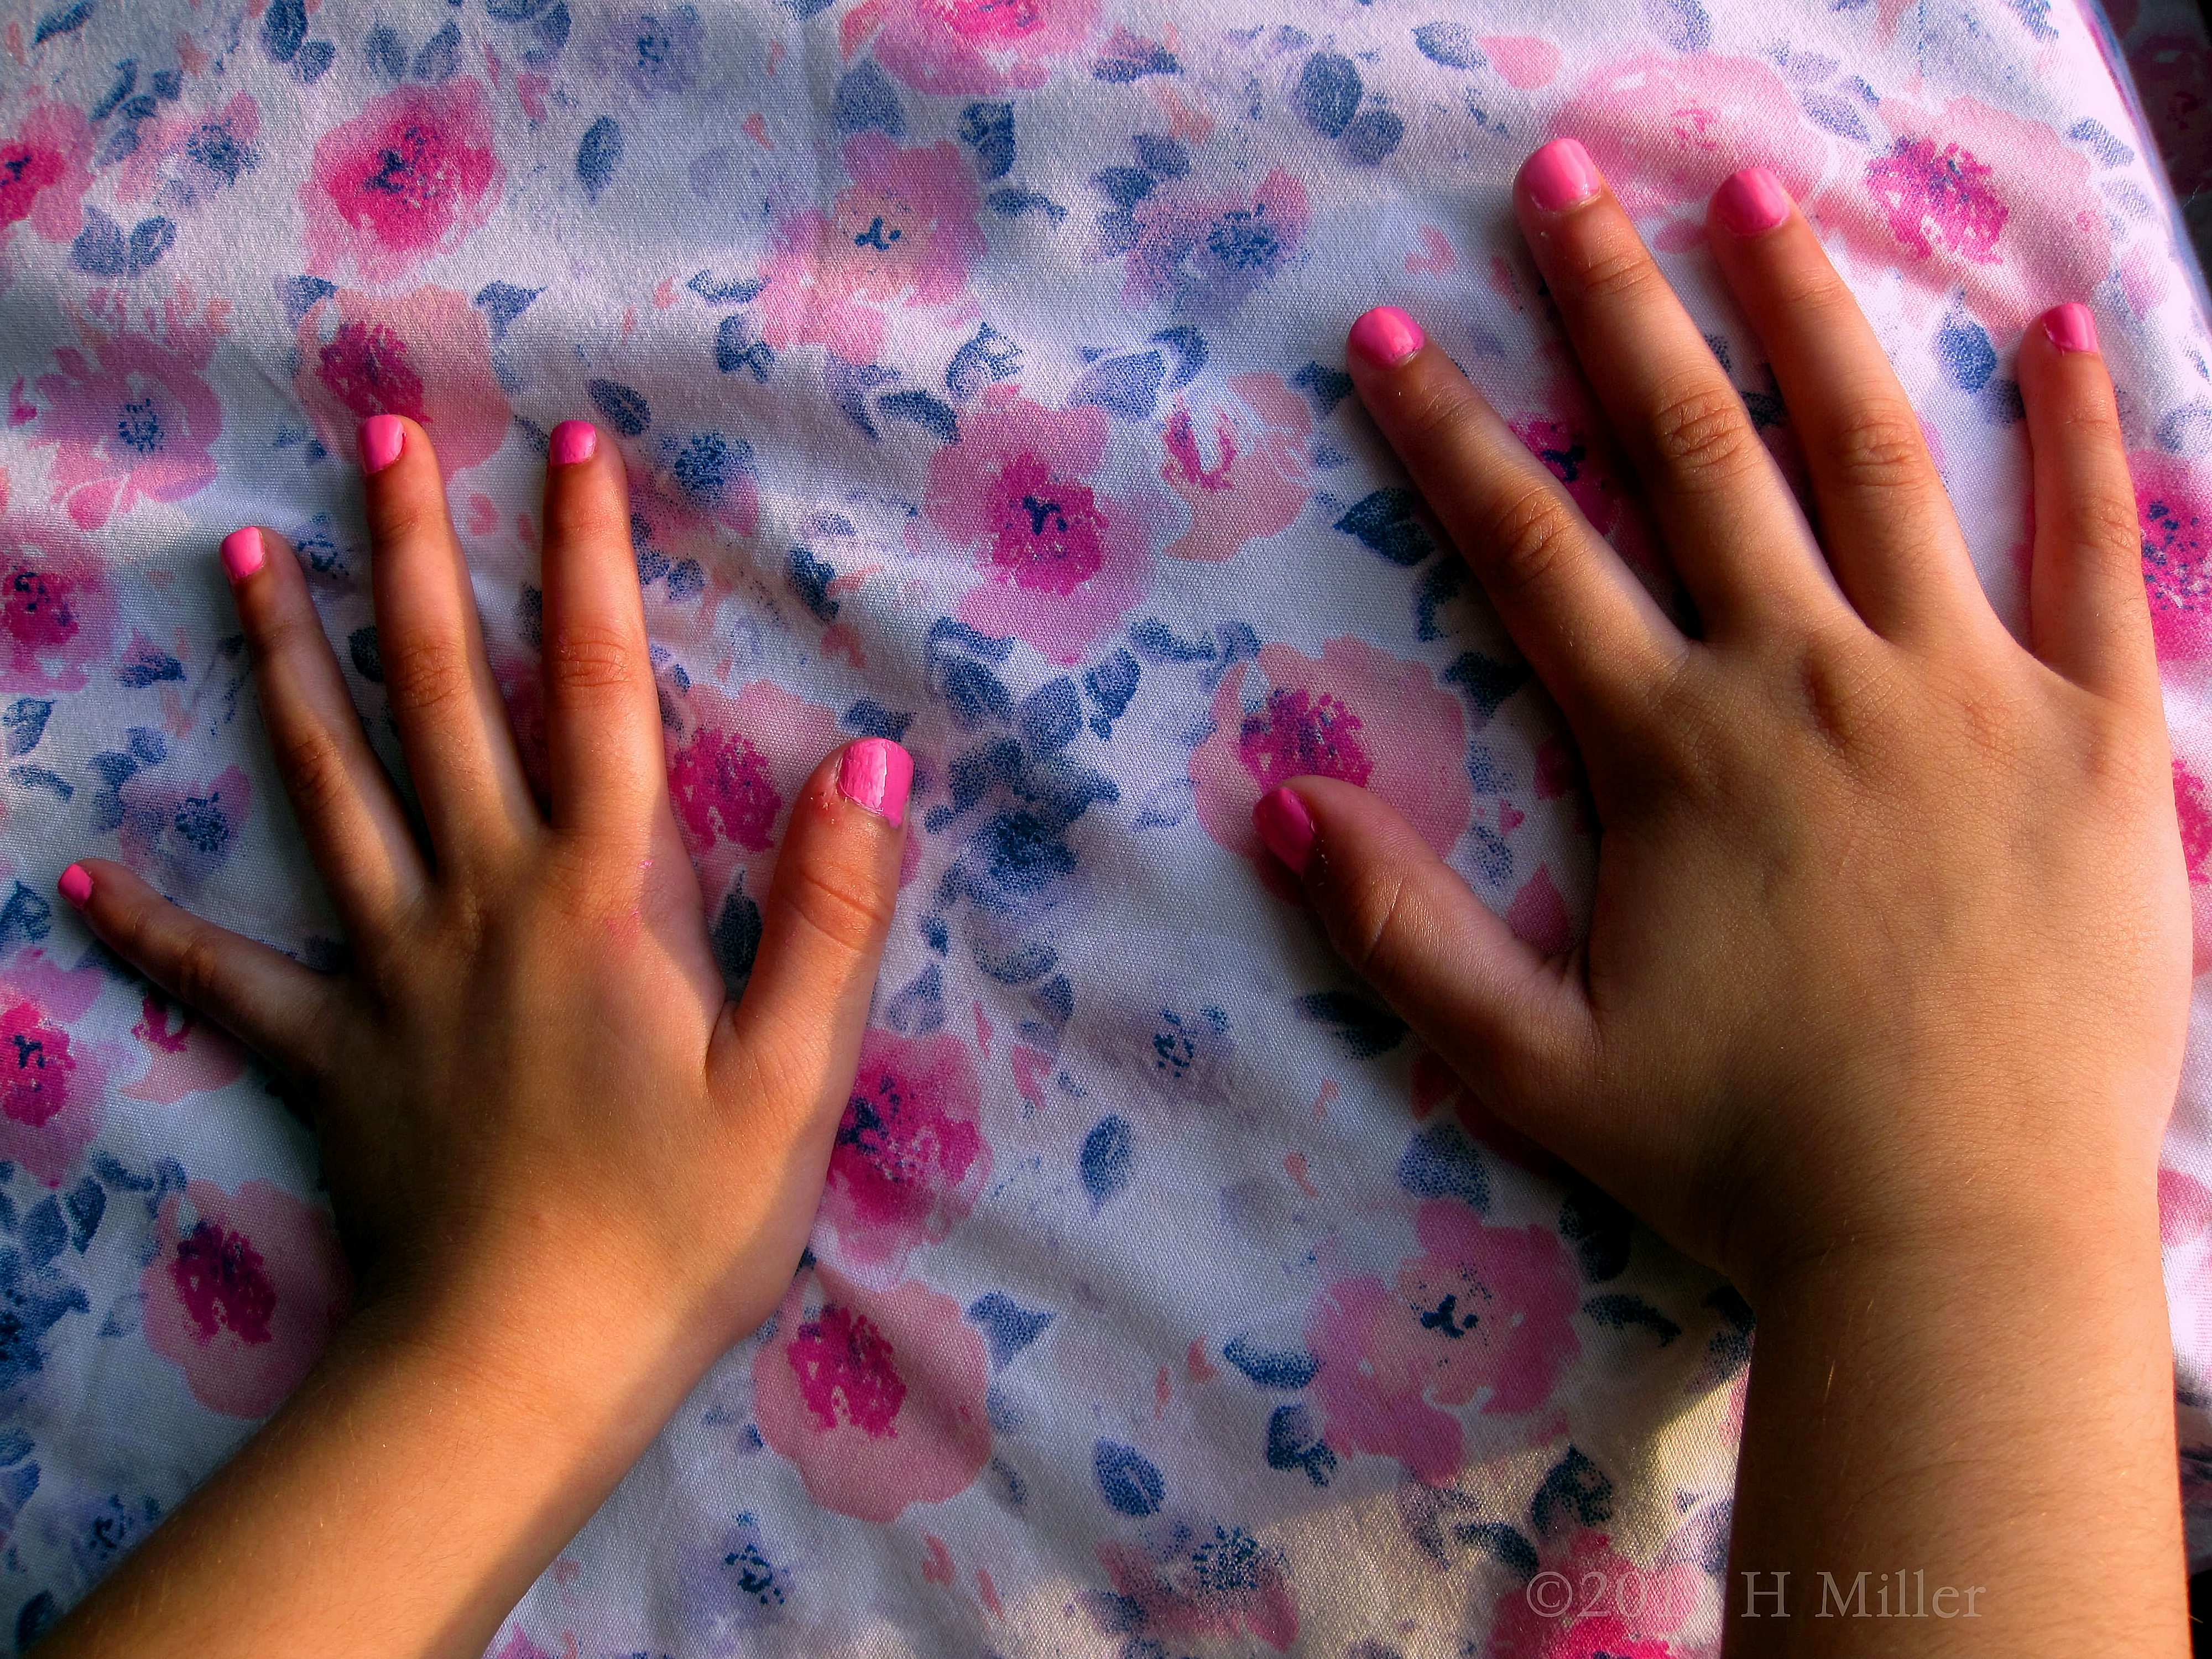 Another Lovely Pink Kids Manicure!